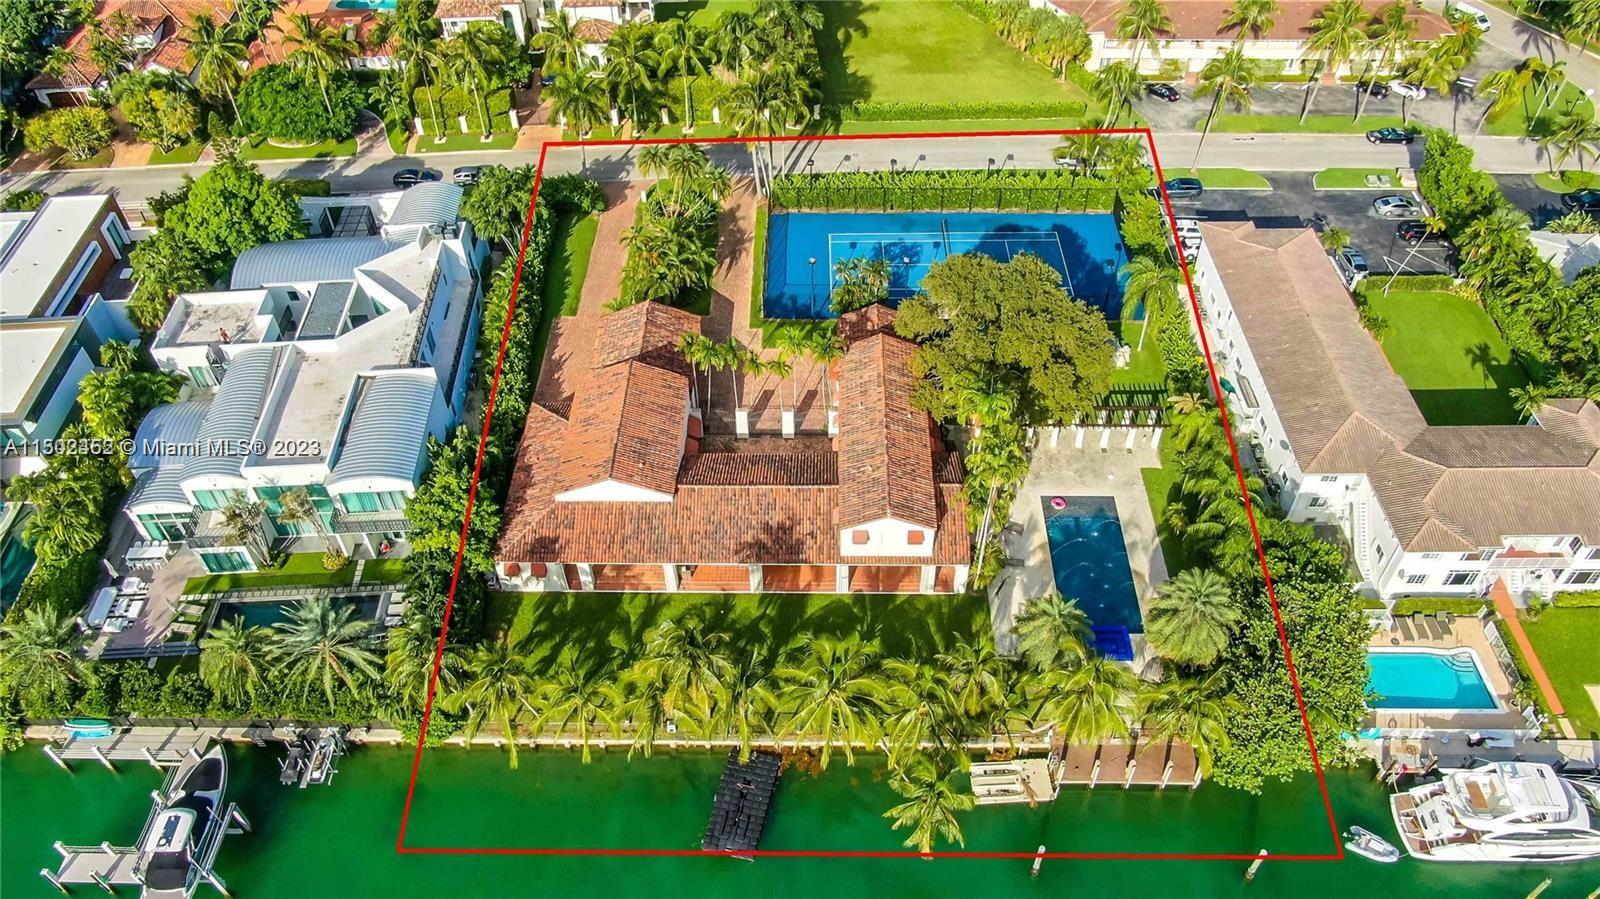 Do you want what NOBODY else has? How about a magnificent, one-of-a-kind Mega Mansion with 200 linear ft. of deep water frontage with almost 9,000 SFT of enjoyment! The ONLY 1 acre lot, waterfront estate with 200 linear ft in Bal Harbour Village. Enough room for your Megayacht, 10+ Luxury vehicles, & even a spot for your helicopter! Did I mention the fully lit tennis court? Architecturally distinctive fortress on an exclusive 24 hr secured gated island. Magnificent property includes newly restored large swimming pool & deep water dockage - easy 5 minutes ocean access with no fixed bridges. Can't find your perfect home? Your Classic Mediterranean meets Mid-Century Compound awaits! SELLER FINANCING AVAILABLE, call agent for terms! Can be divided into 2 buildable lots. Survey in attachments.